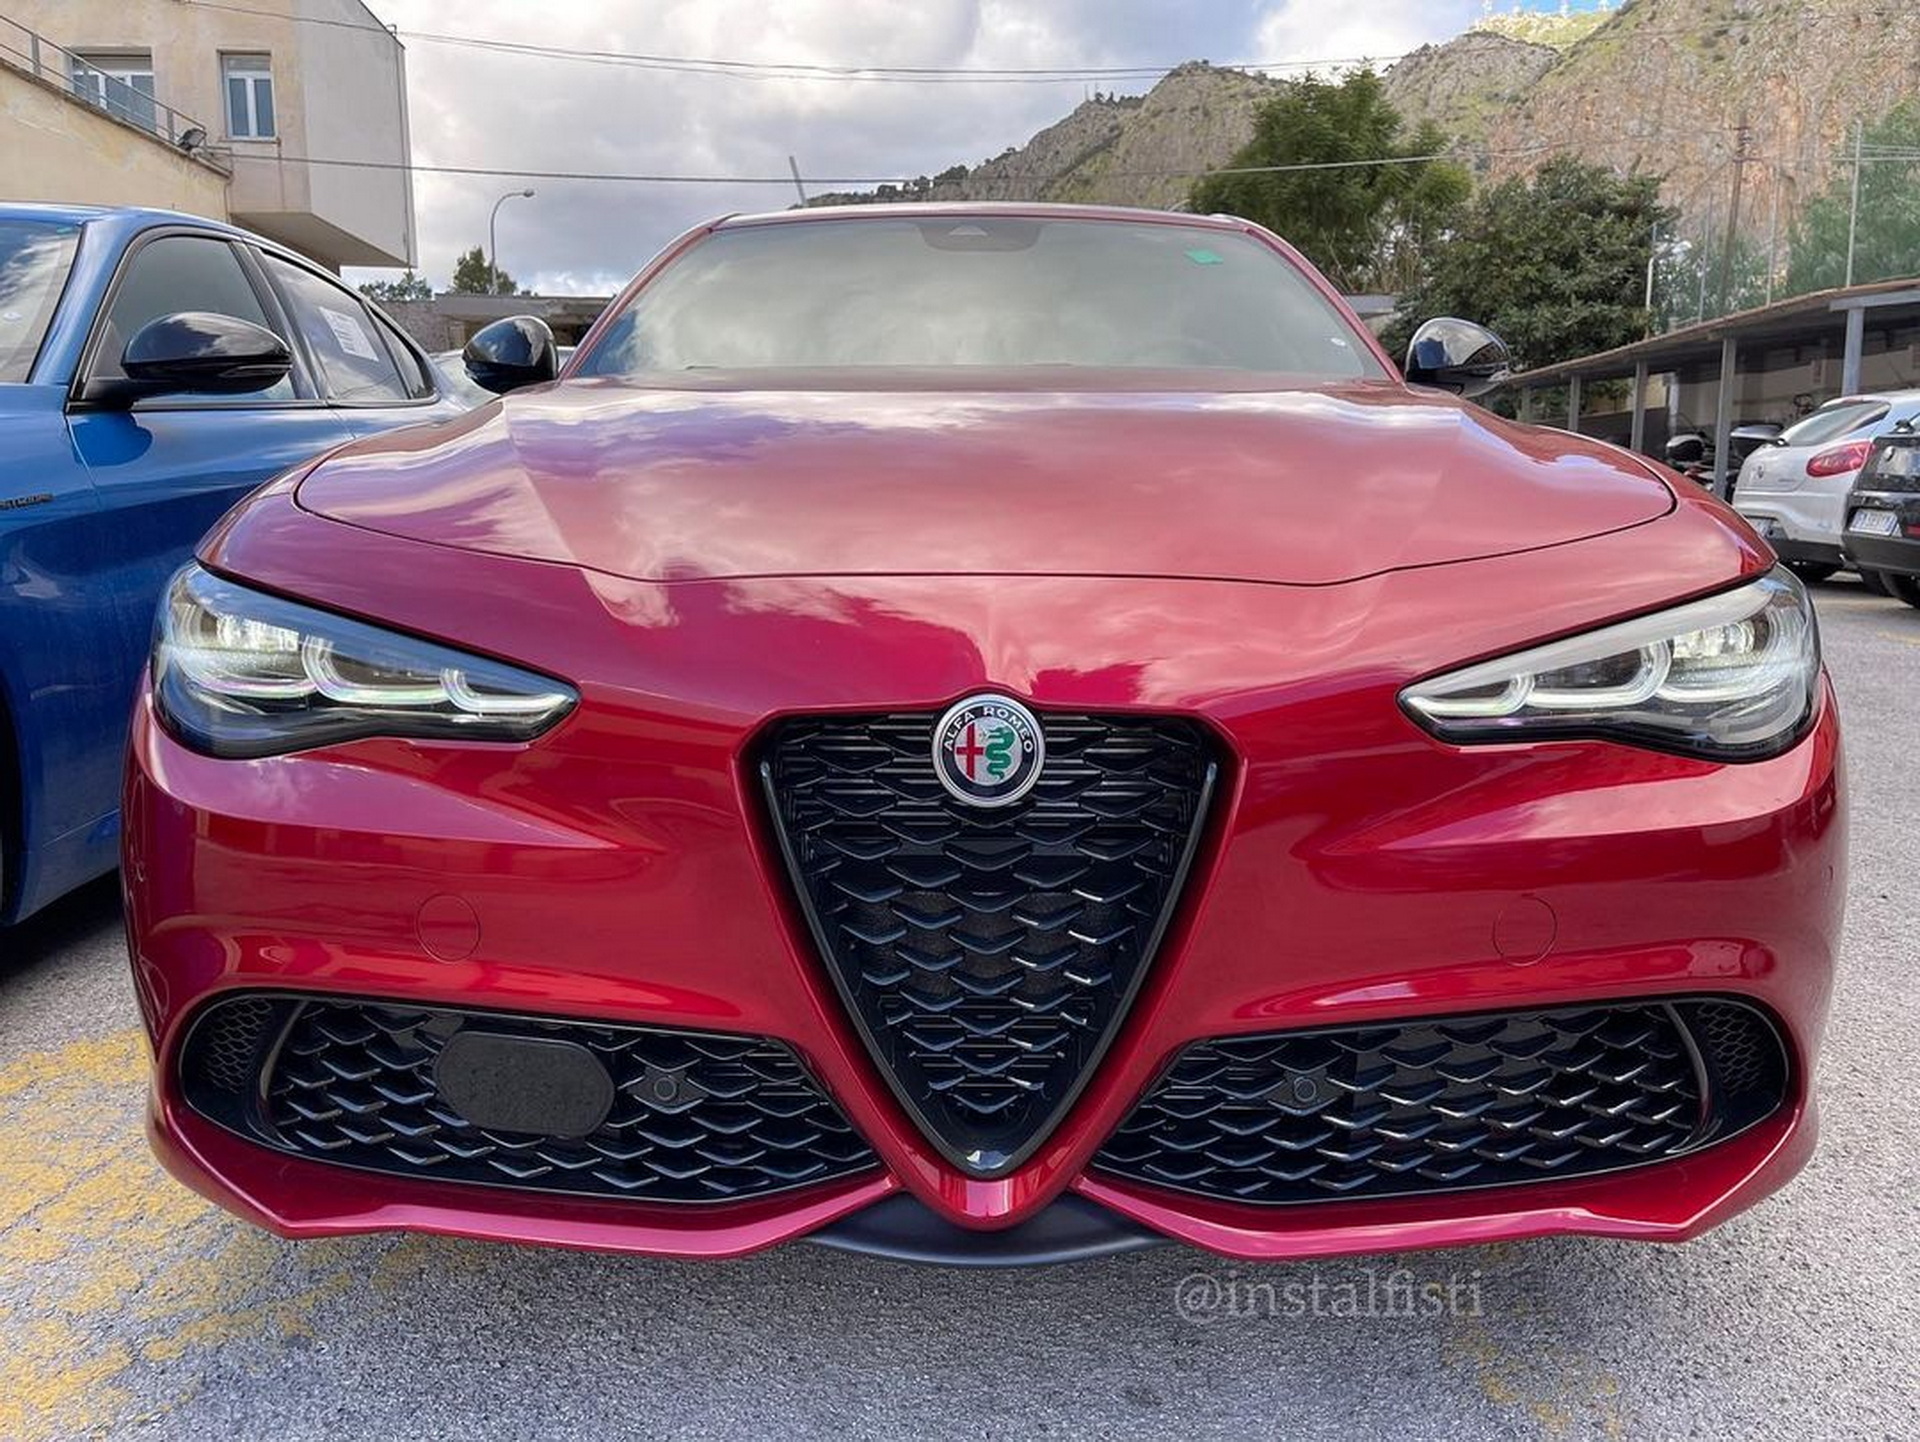 Check Out The Updated 2023 Alfa Romeo Giulia And Stelvio From Up Close |  Carscoops